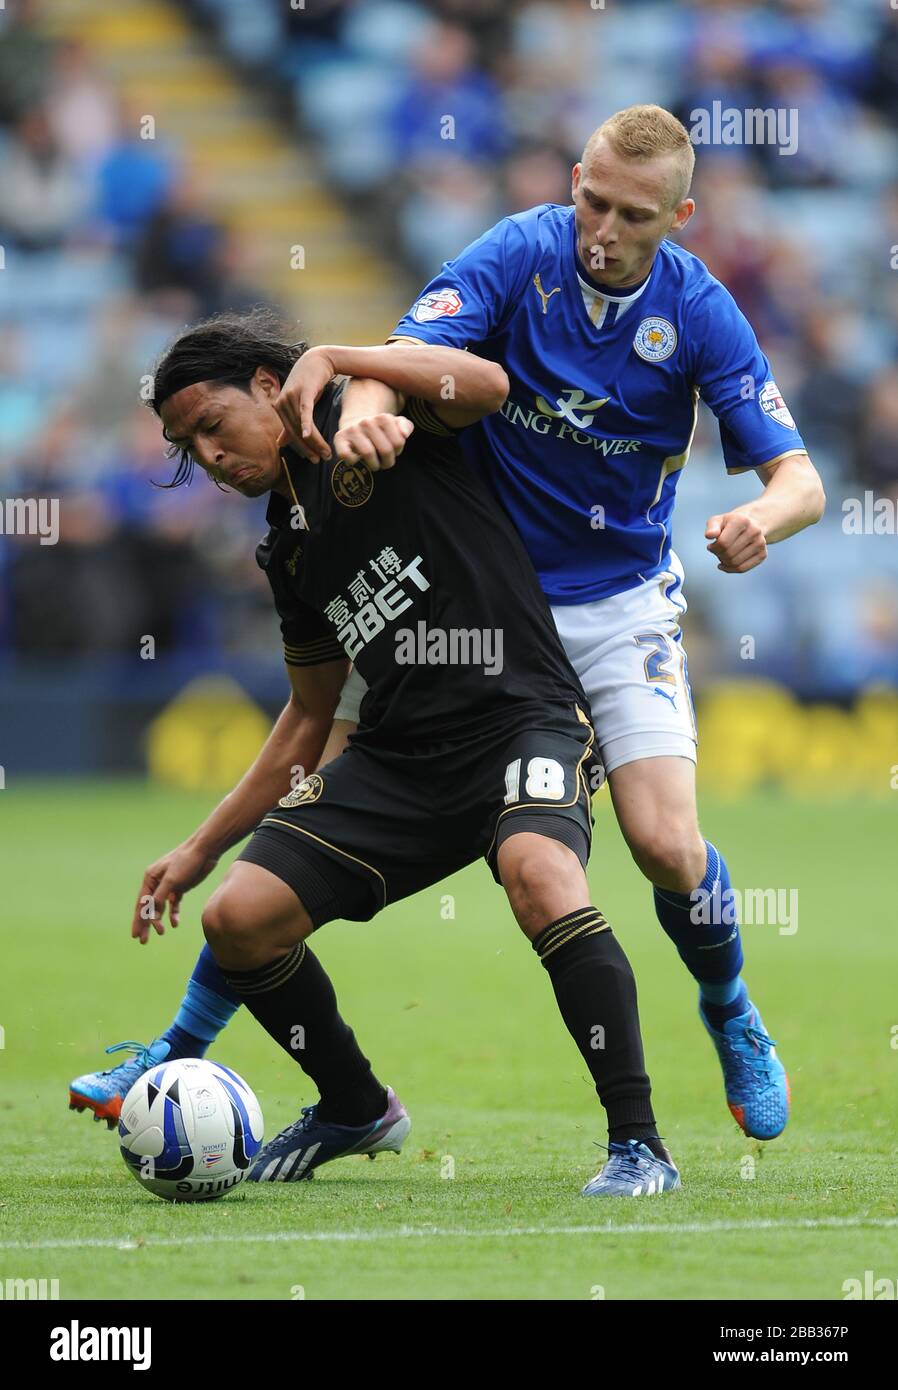 Leicester City's Ritchie De Laet (right) and Wigan Athletic's Roger Espinoza (left) battle for the ball Stock Photo